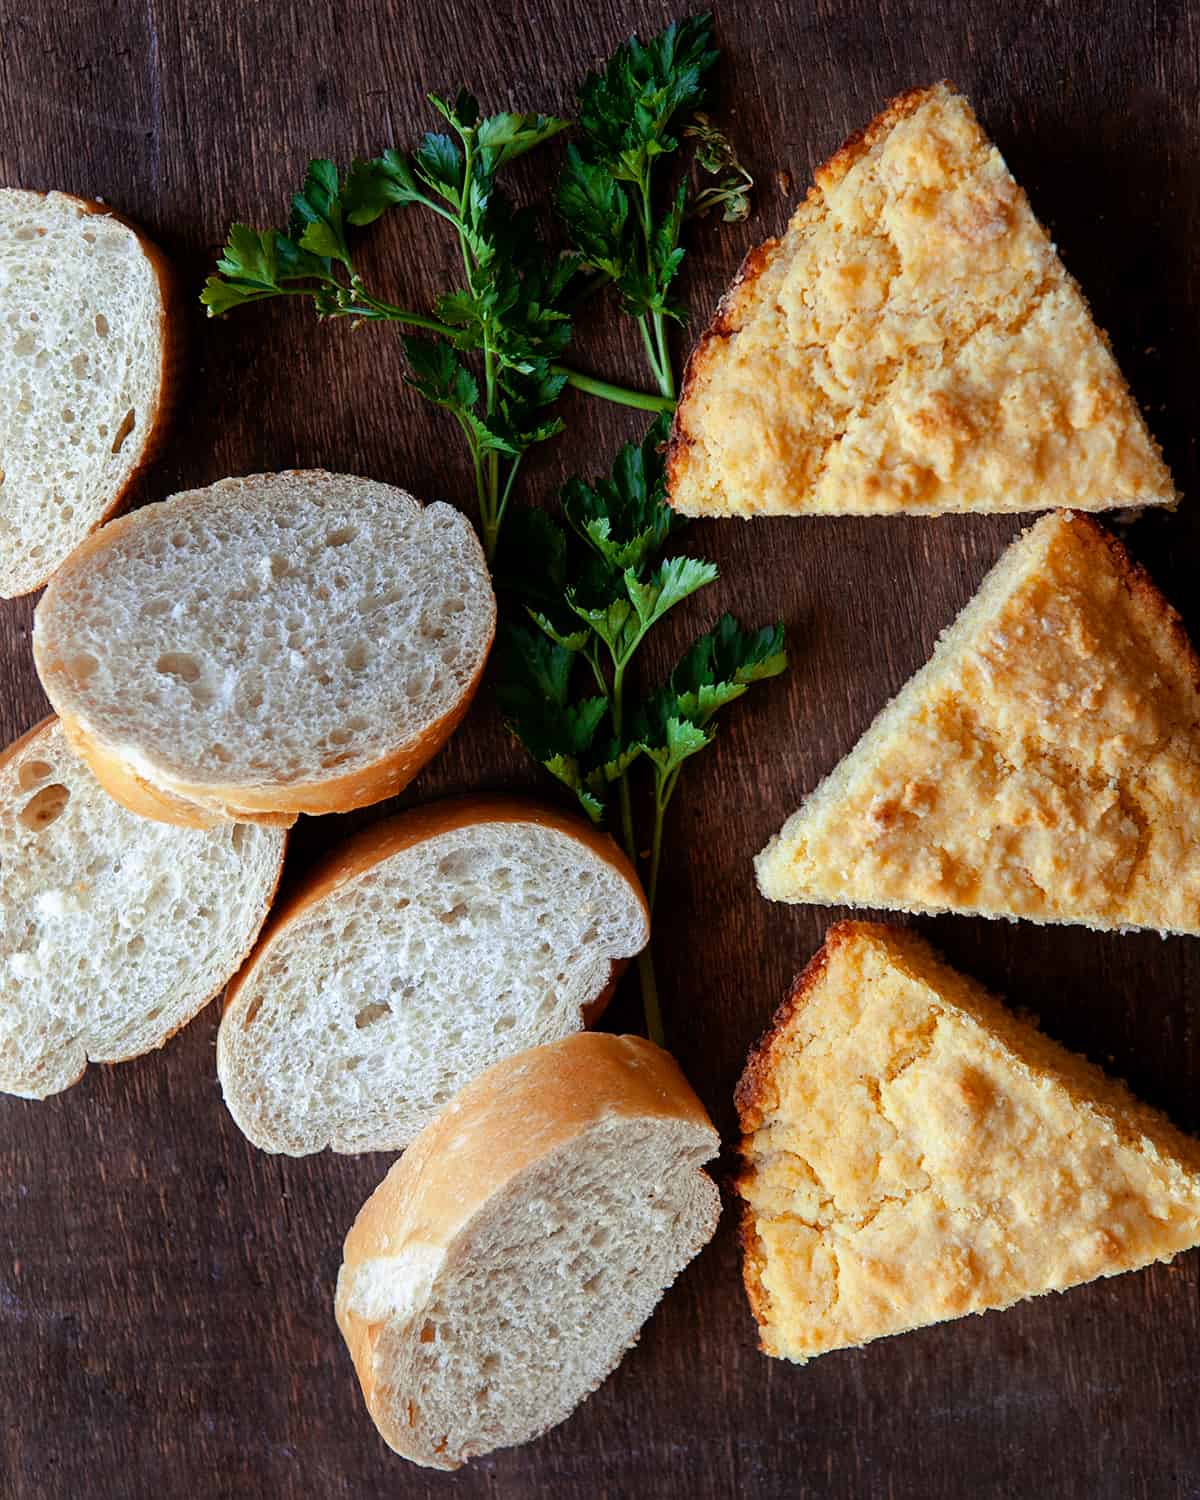 Cornbread and white bread on a wooden board with parsley 